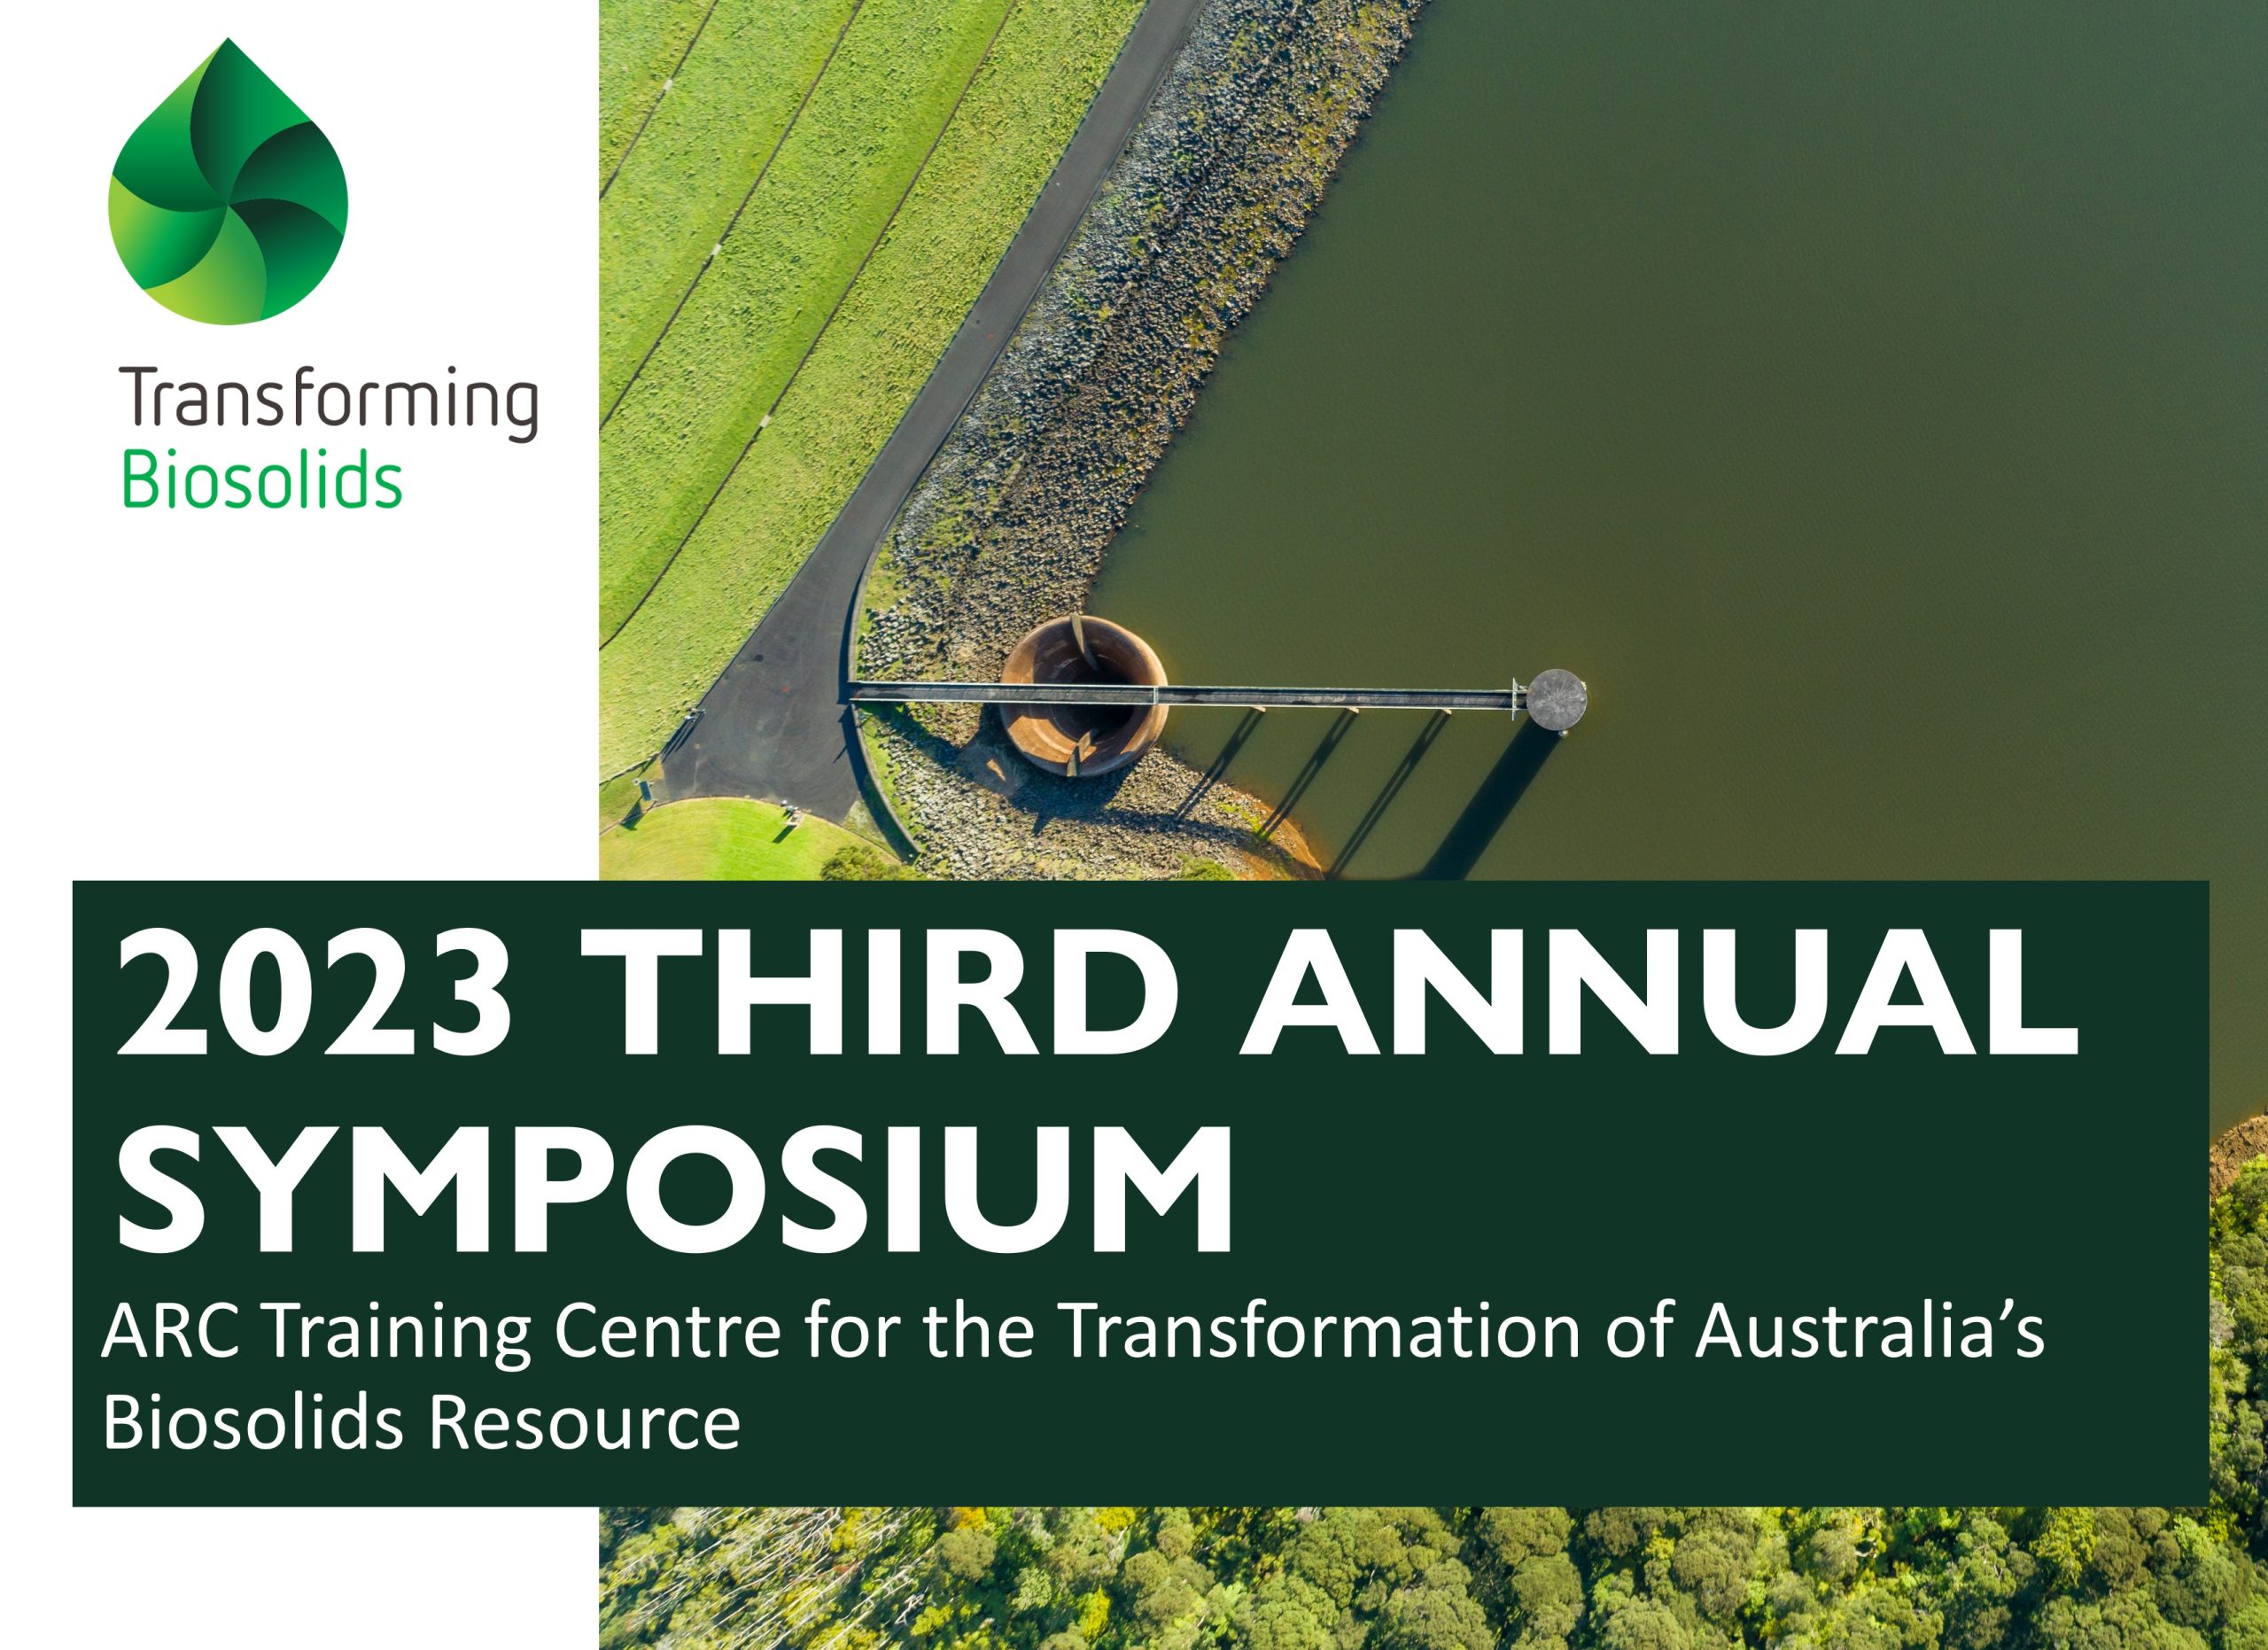 EVENT: University of Queensland, Brisbane will host the third Annual Symposium for the ARC Transforming Biosolids Training Centre: 25 to 27 September 2023